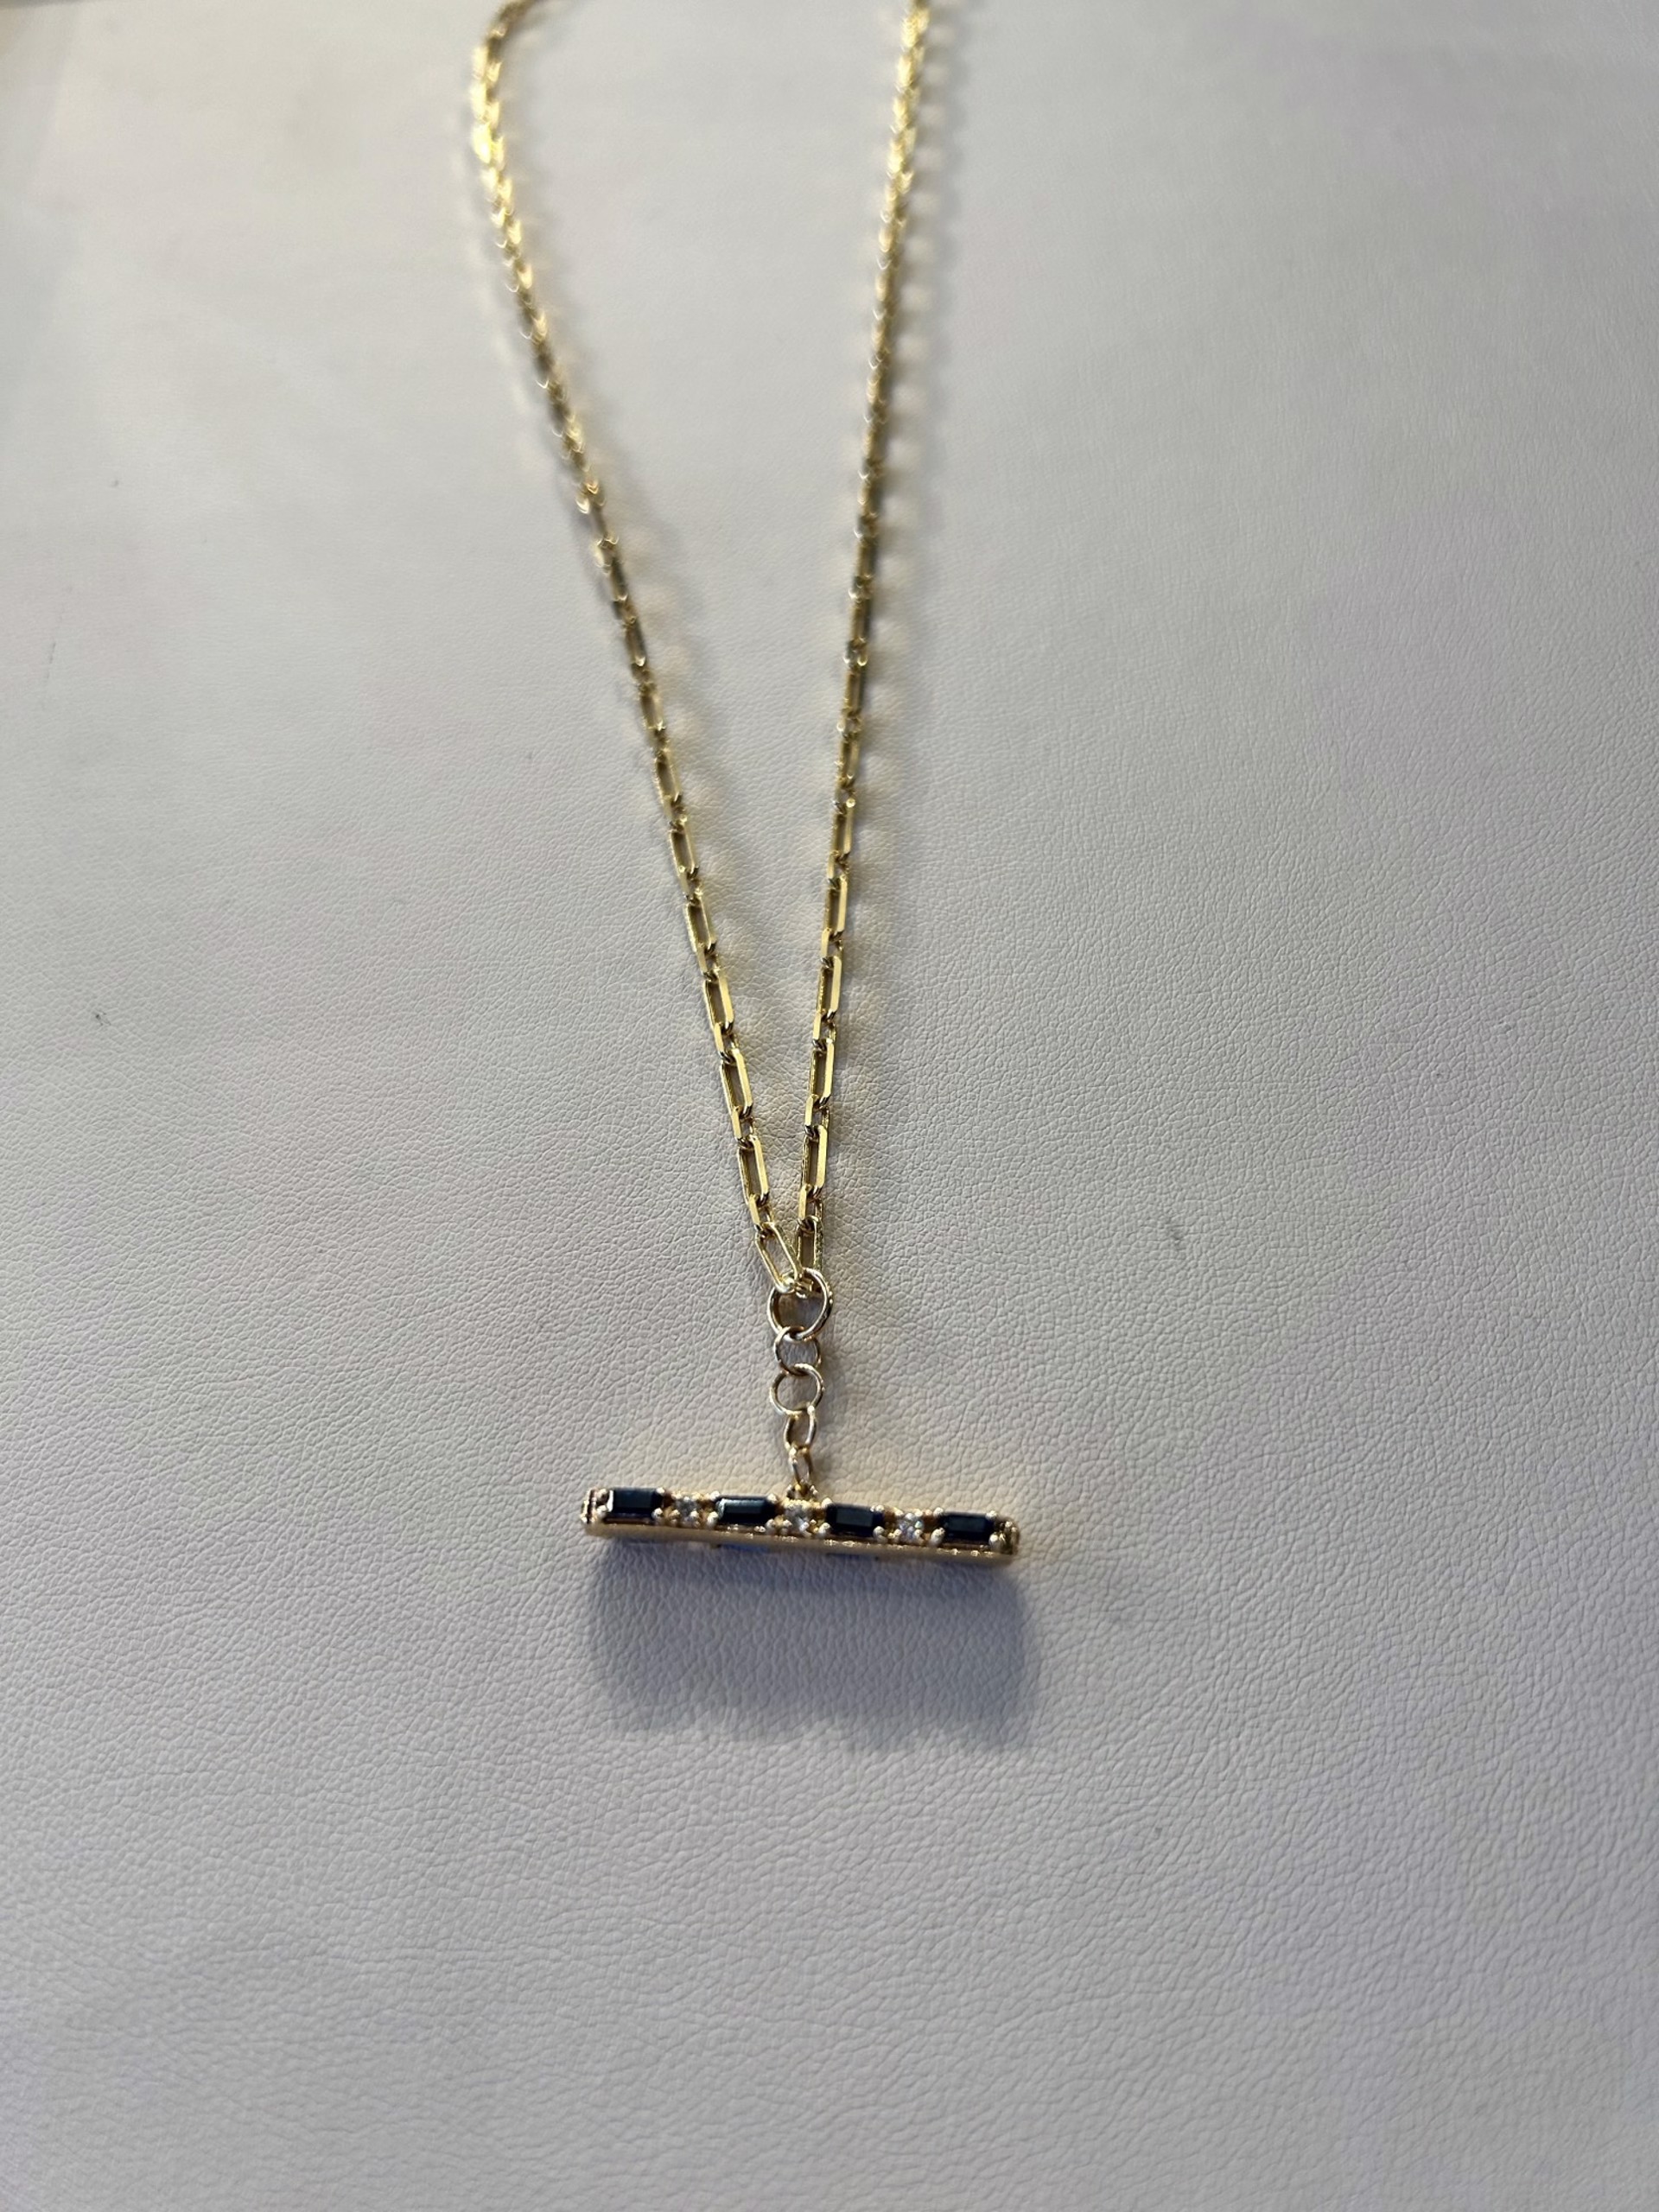 KB-N5 14k Gold Necklace with Large Two-Sided Diamond and Sapphire Bar Pendant by Karen Birchmier